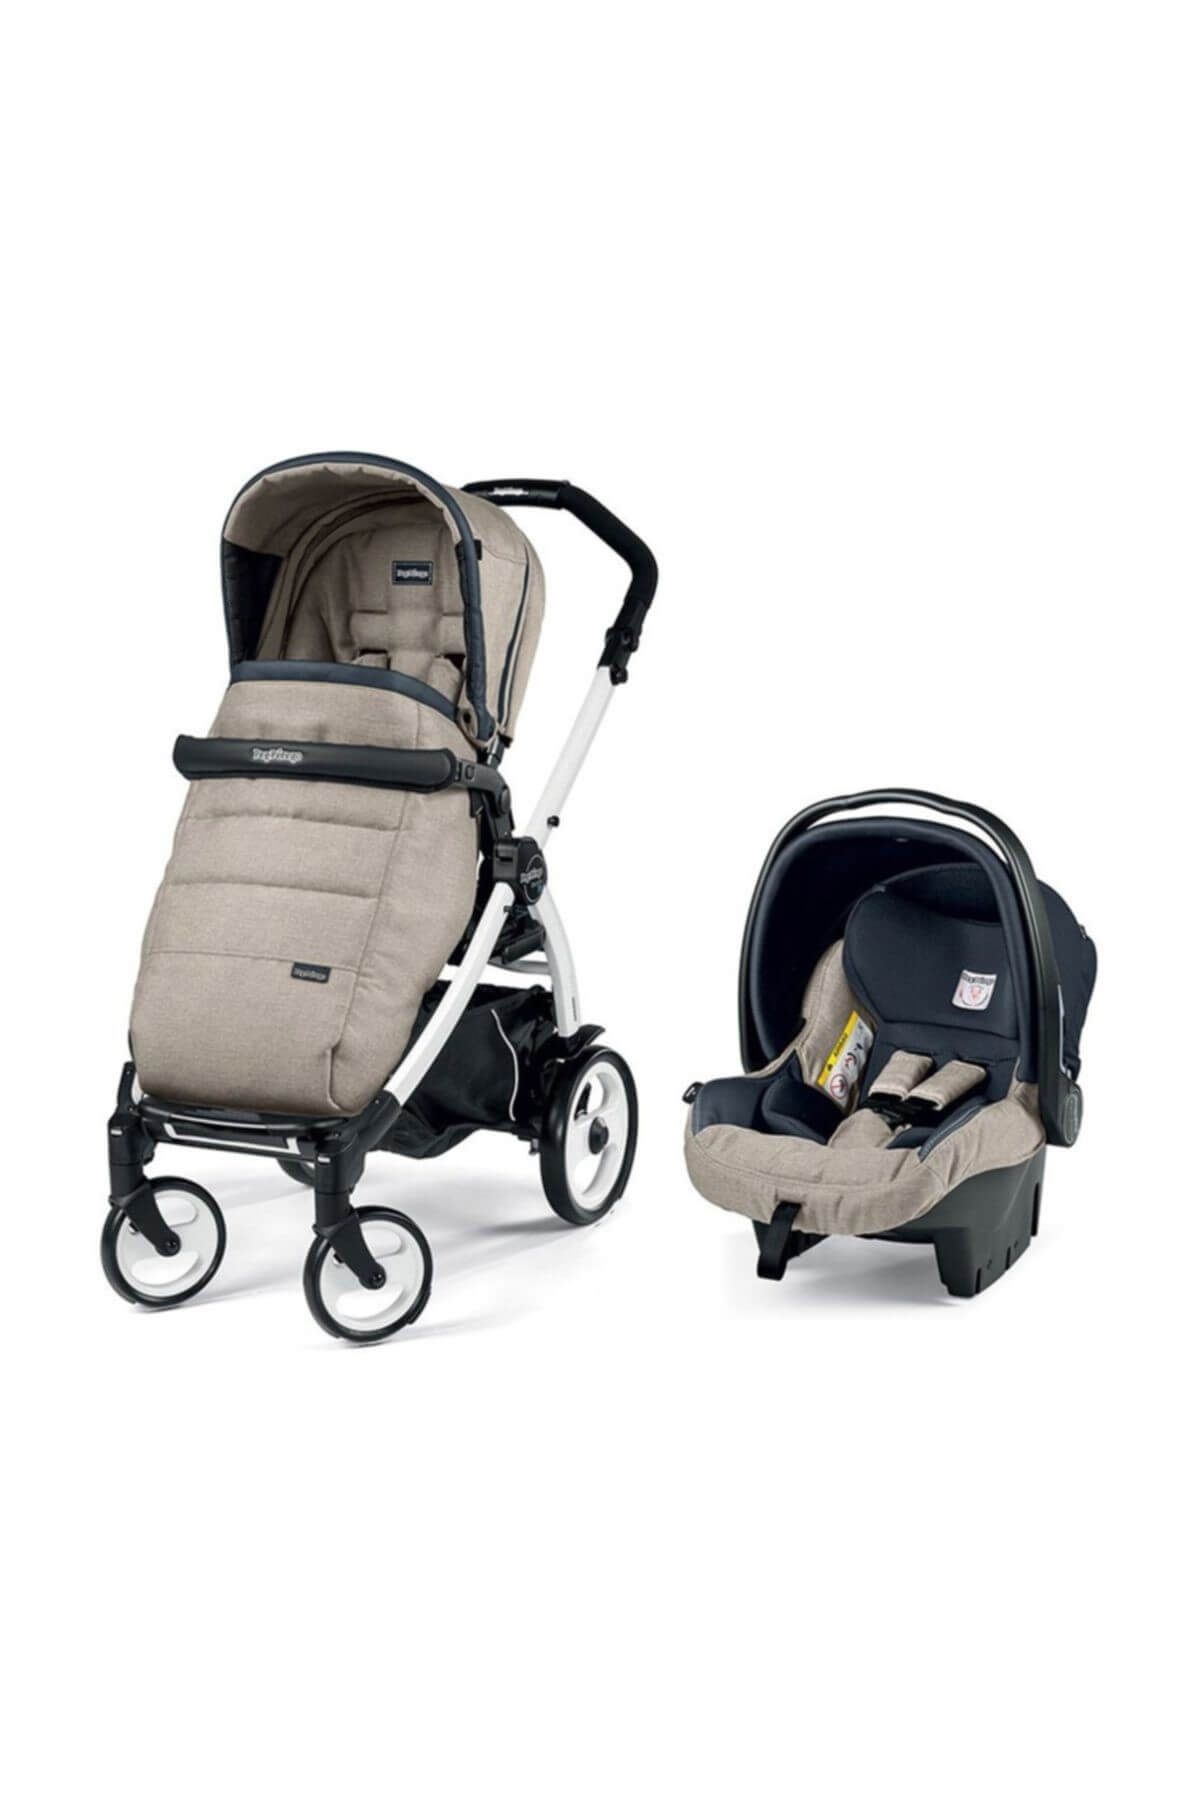 Peg Perego Book 51 B-W Completo Ts Luxe Beige /